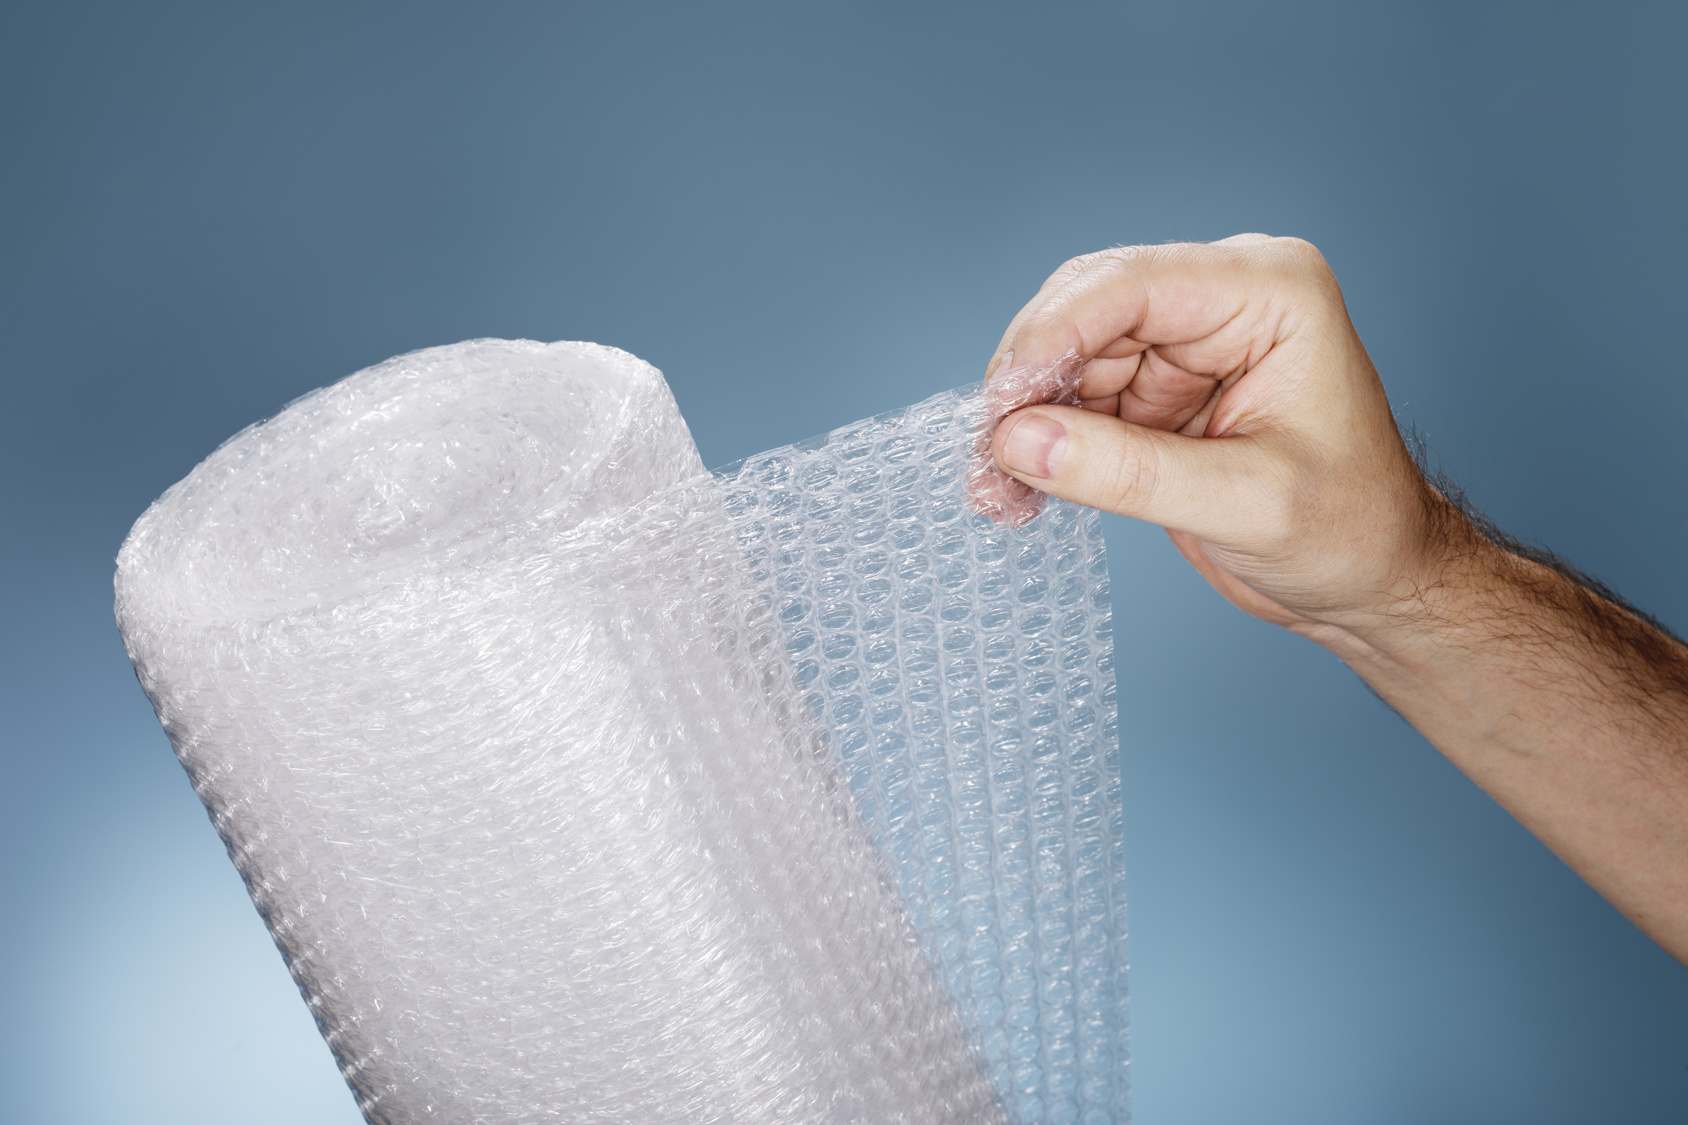 Let’s Get Packing on Bubble Wrap Appreciation Day!